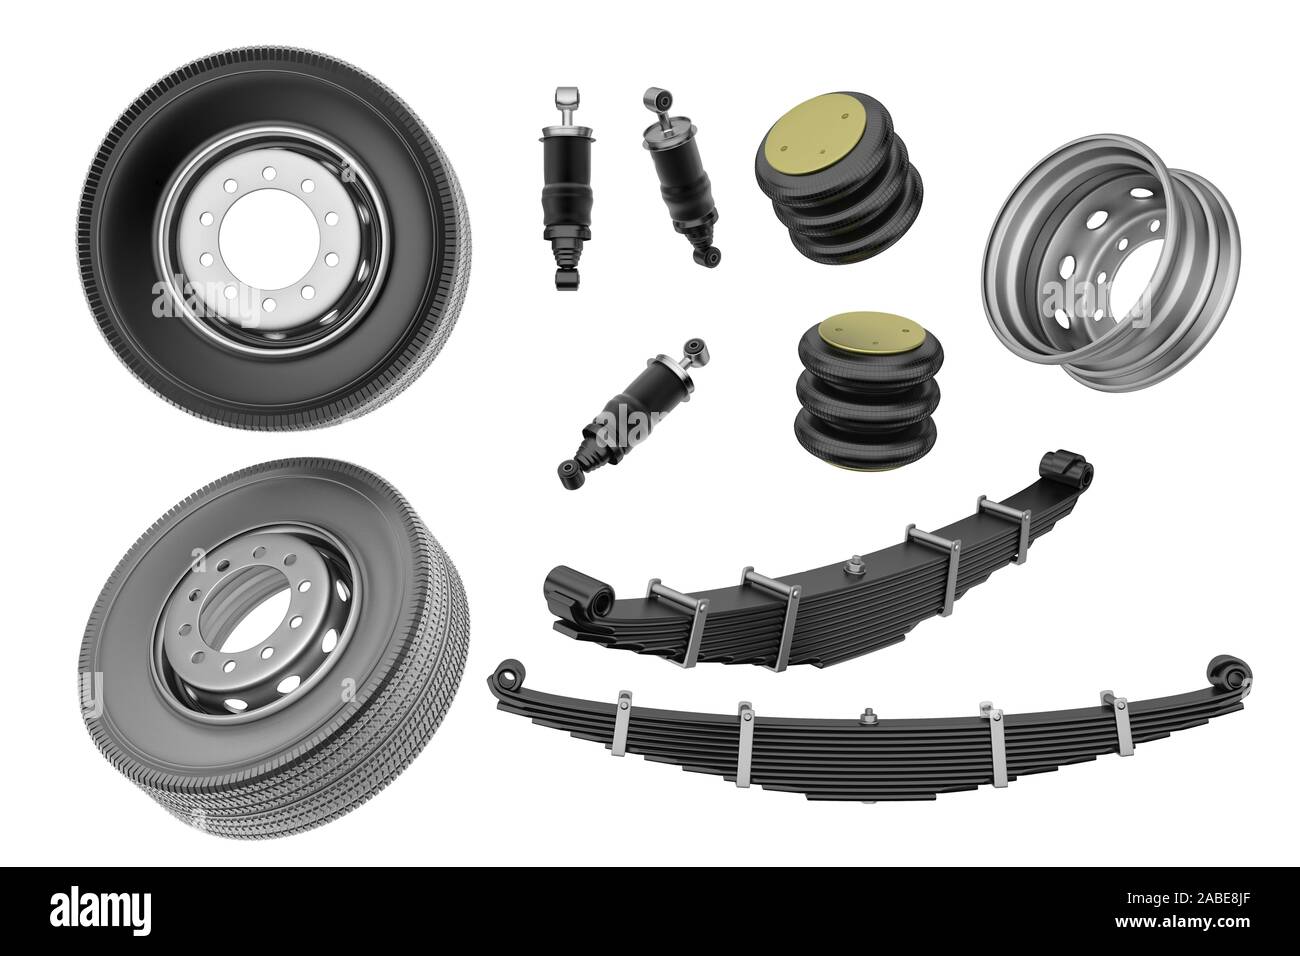 truck parts and accessories